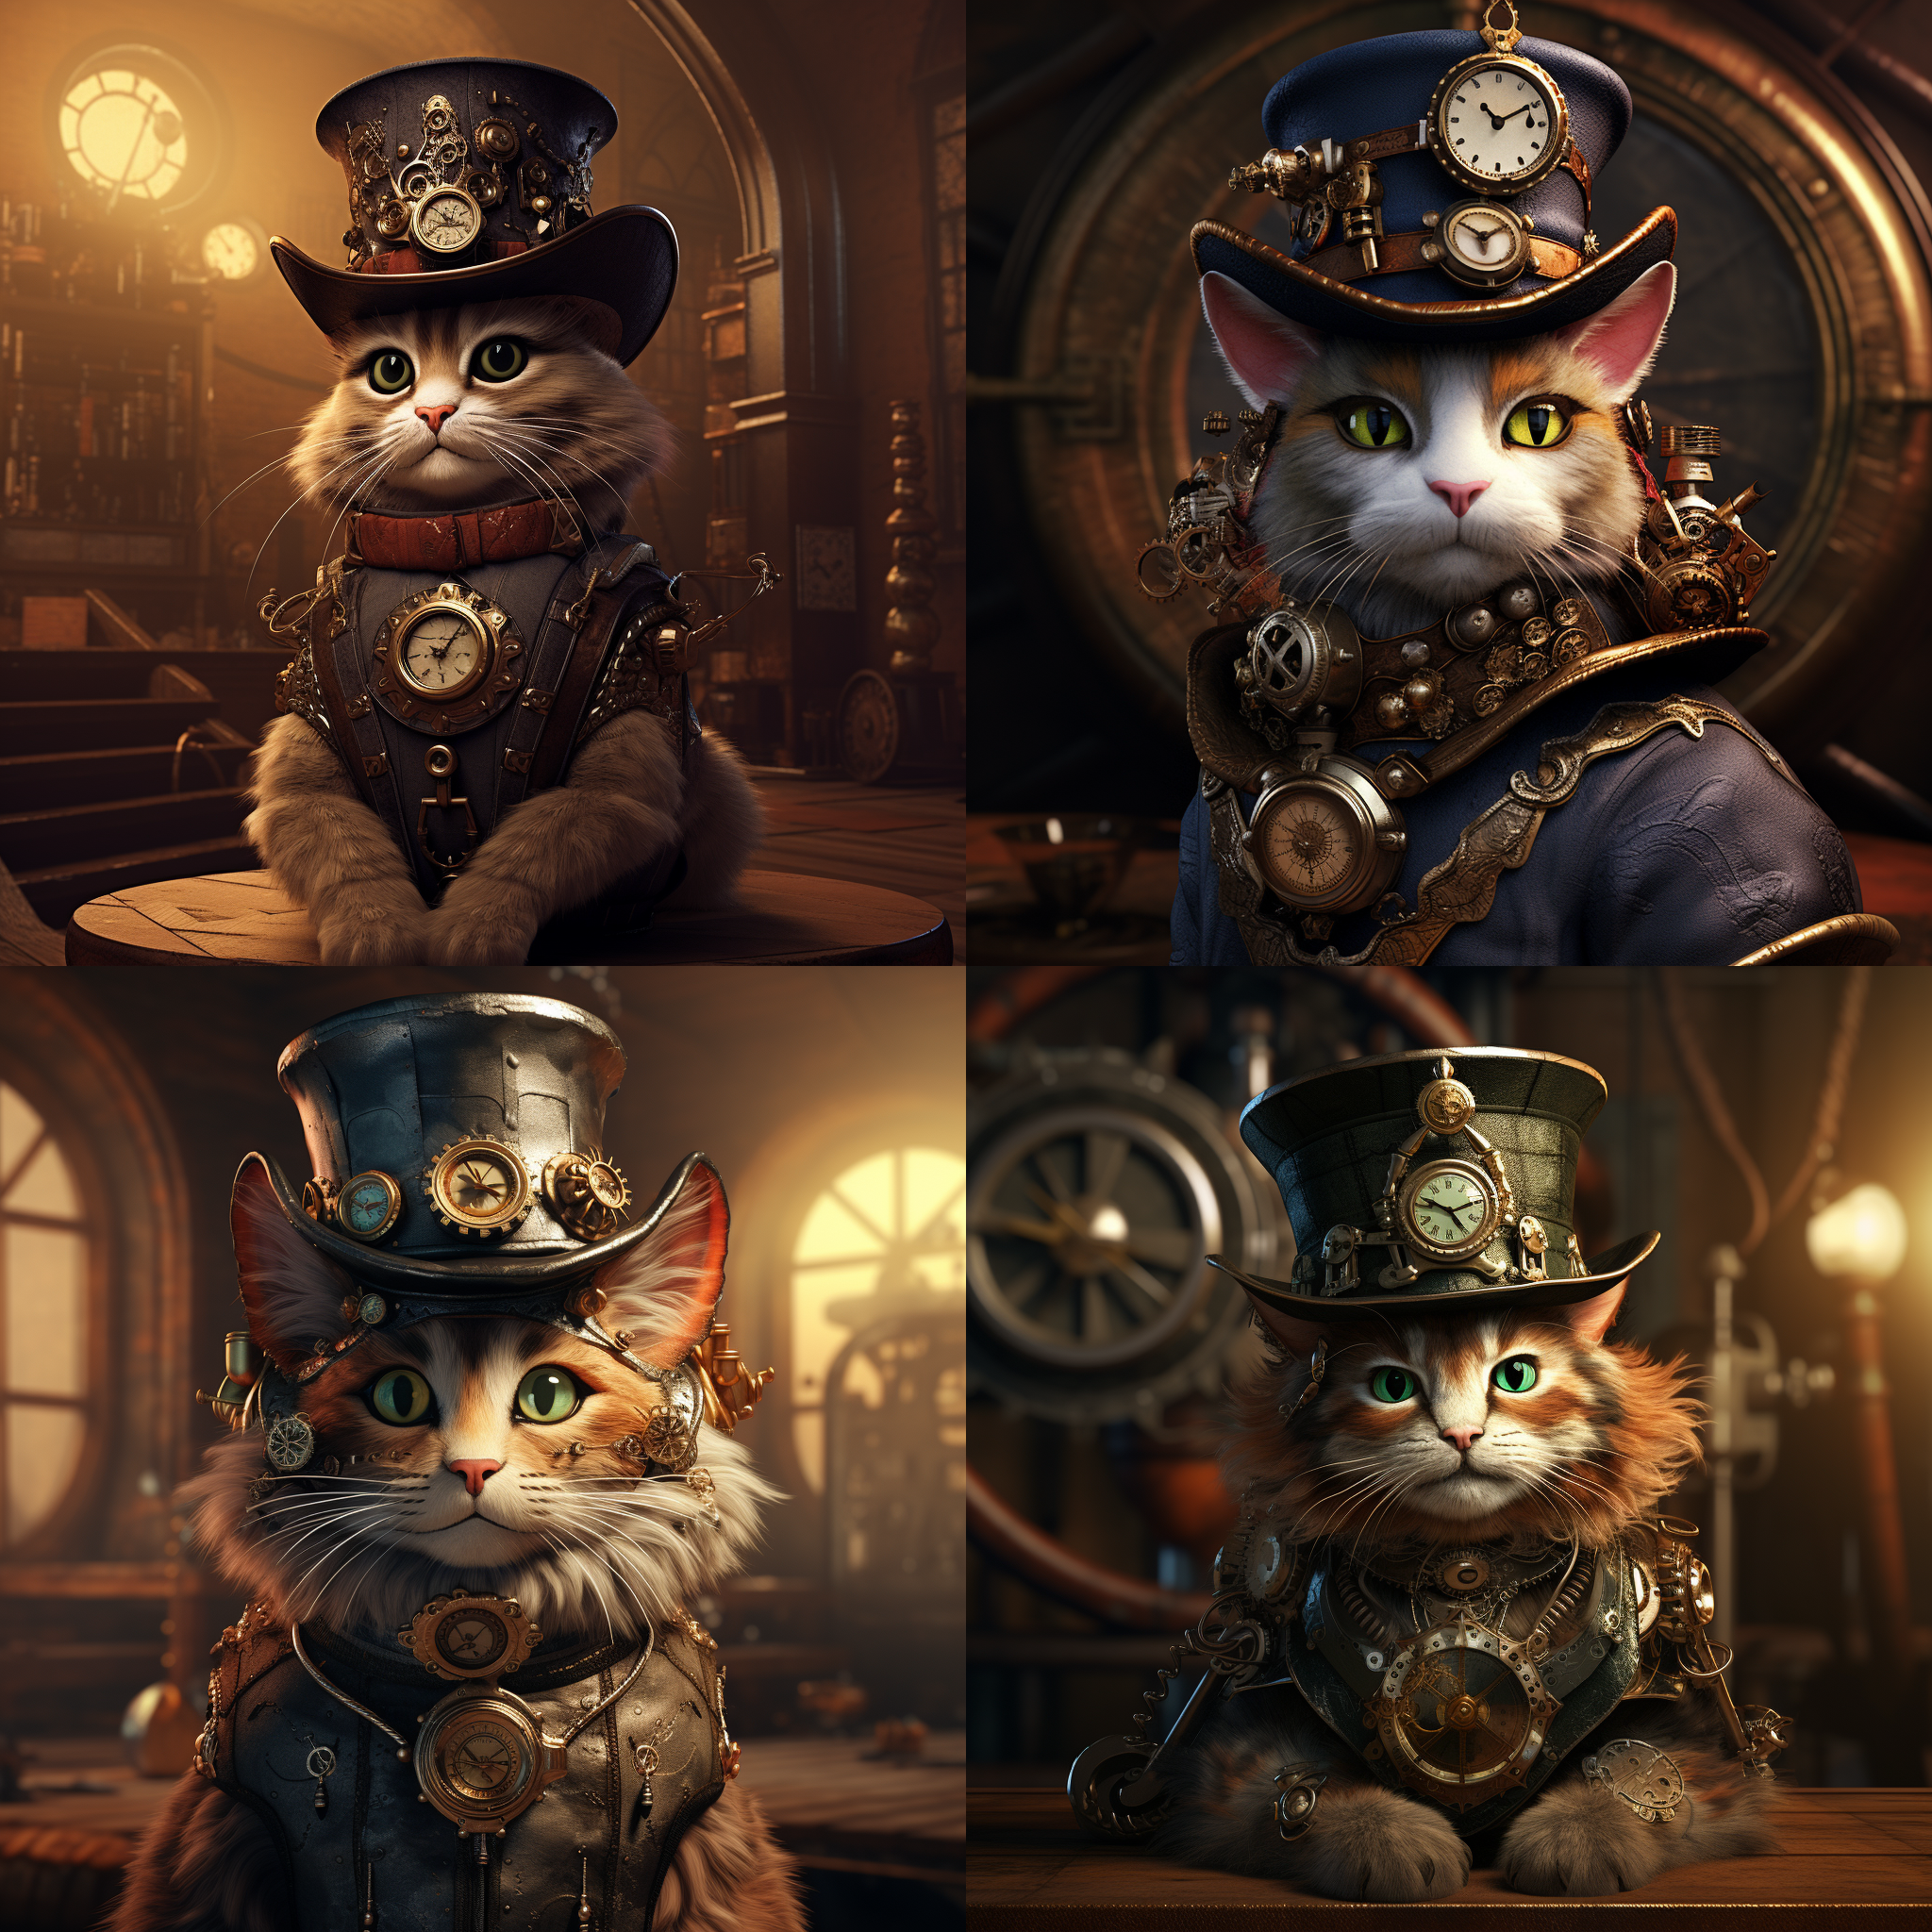 A steampunk-inspired cat with a mechanical top hat, in a Victorian-era setting